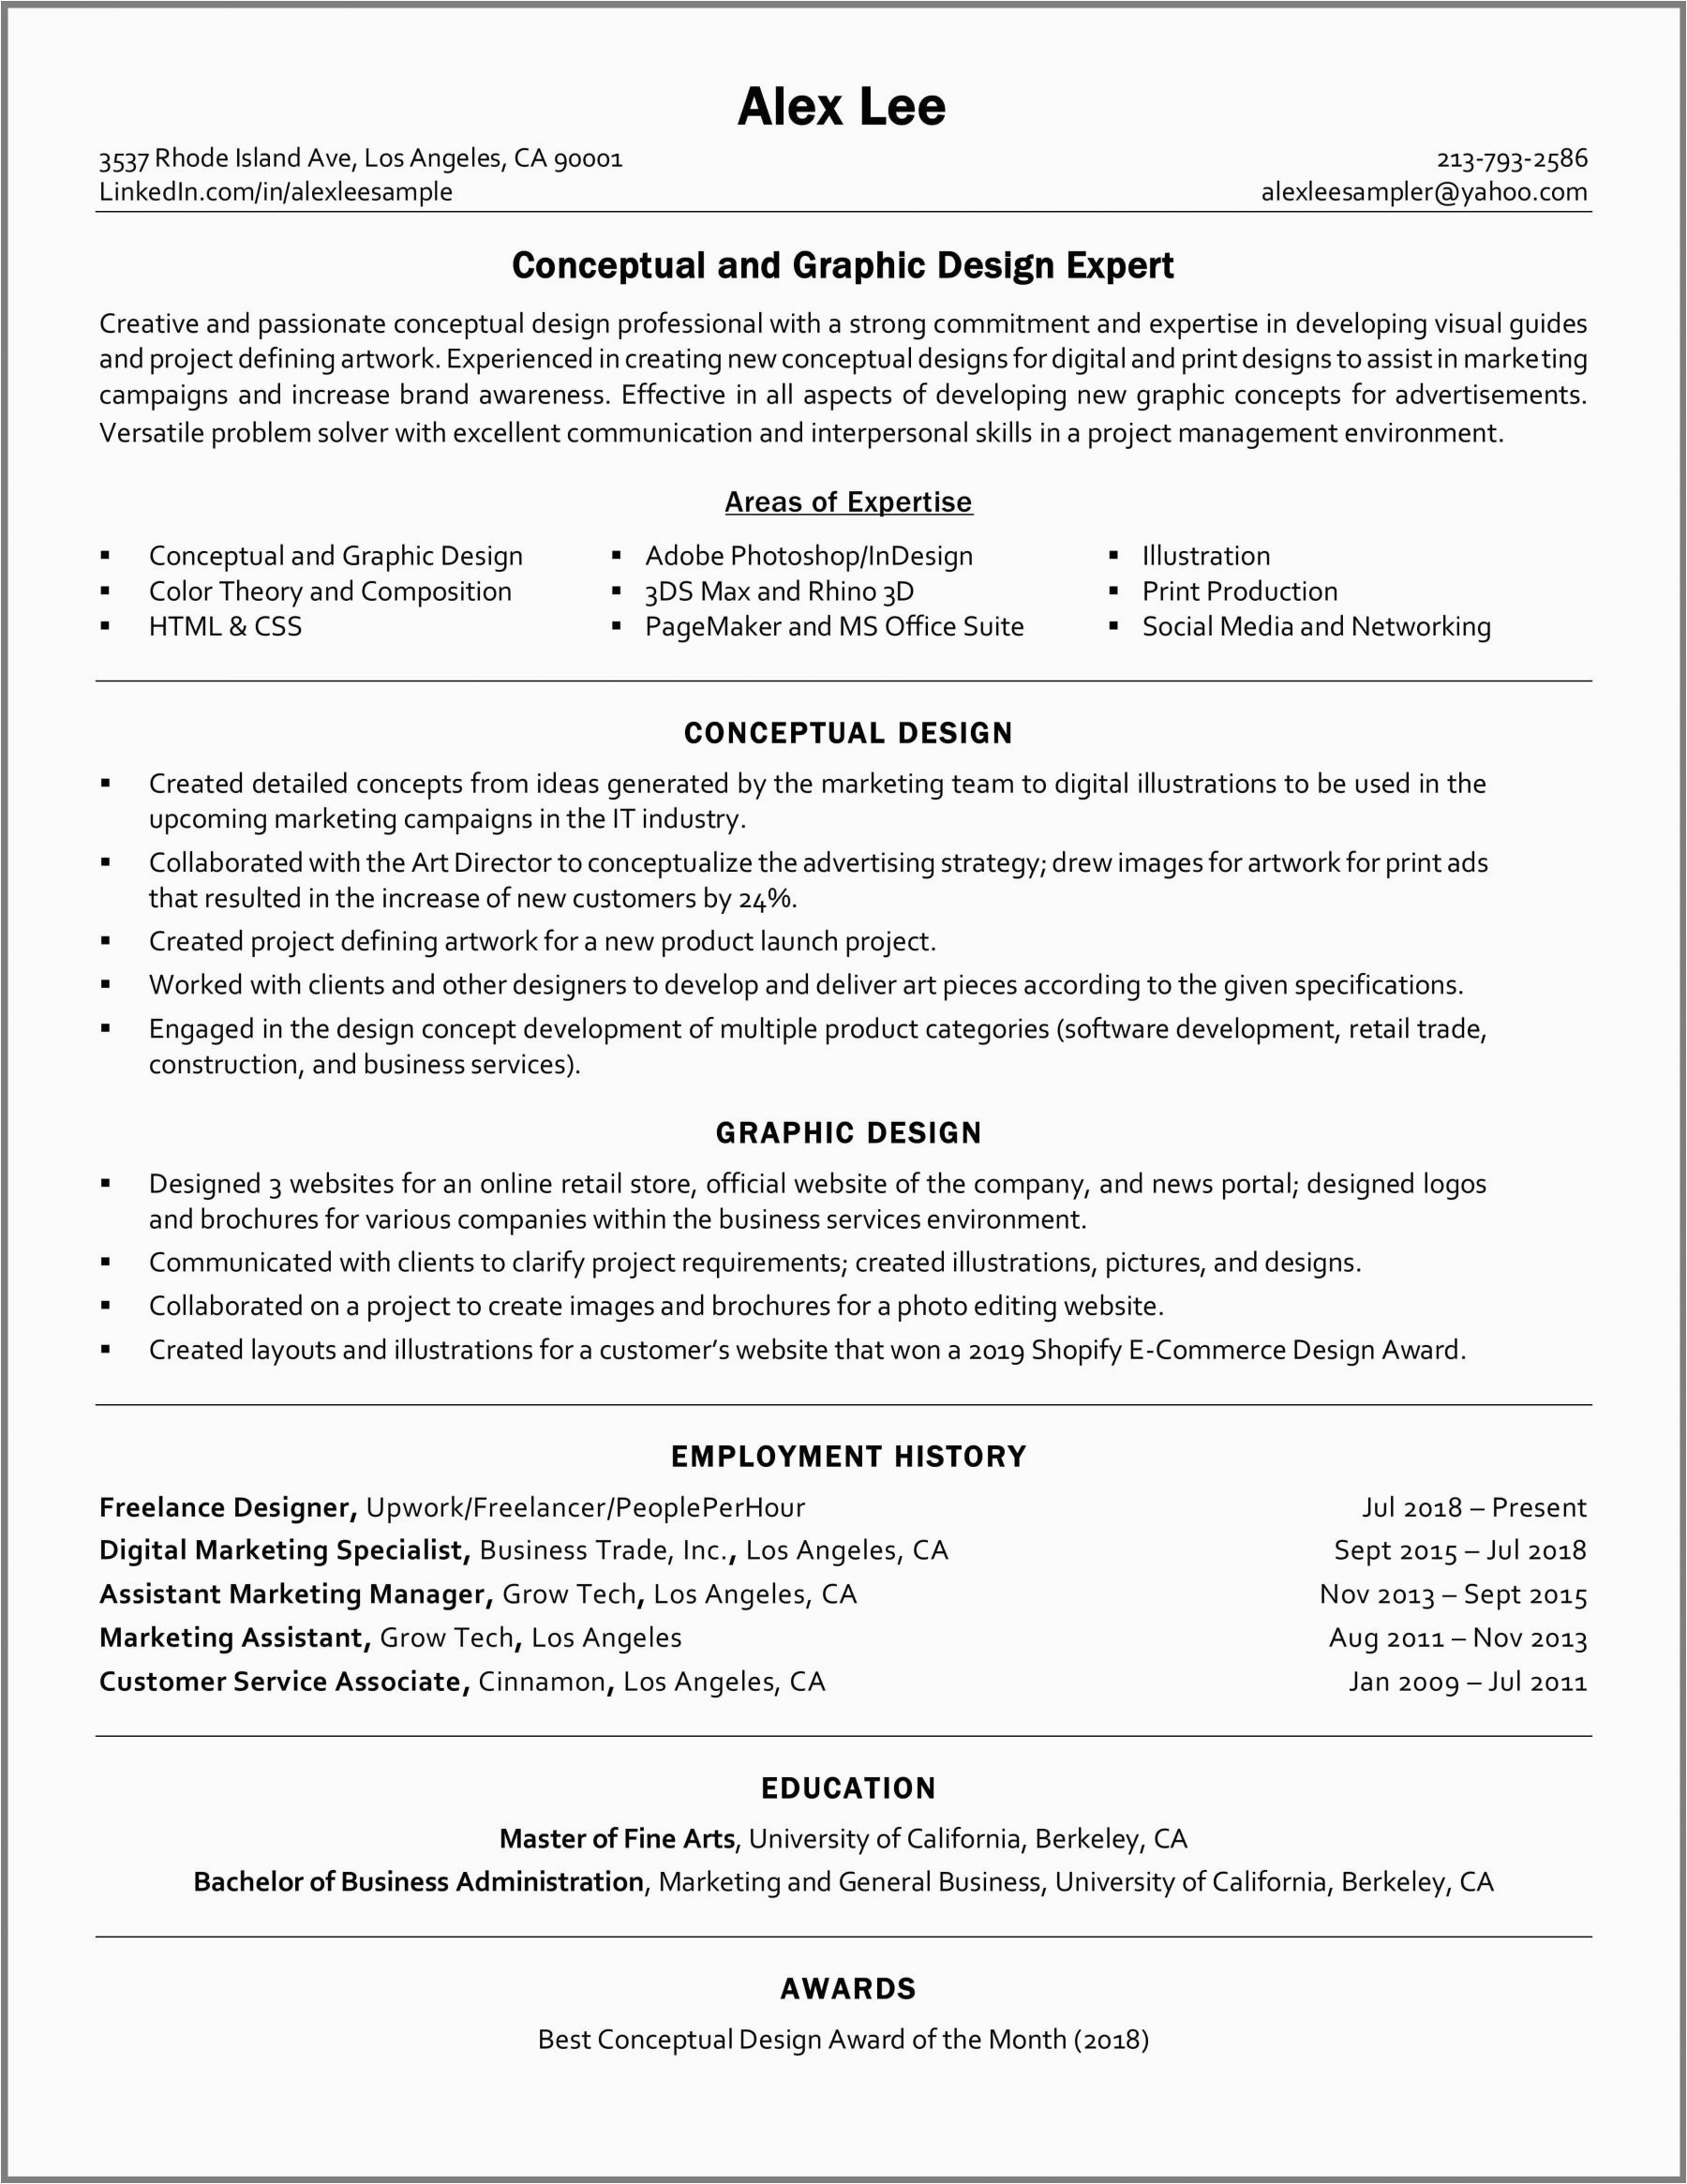 Changing the formatting On A Pre formatted Sample Resume Functional Resume Tips and Template